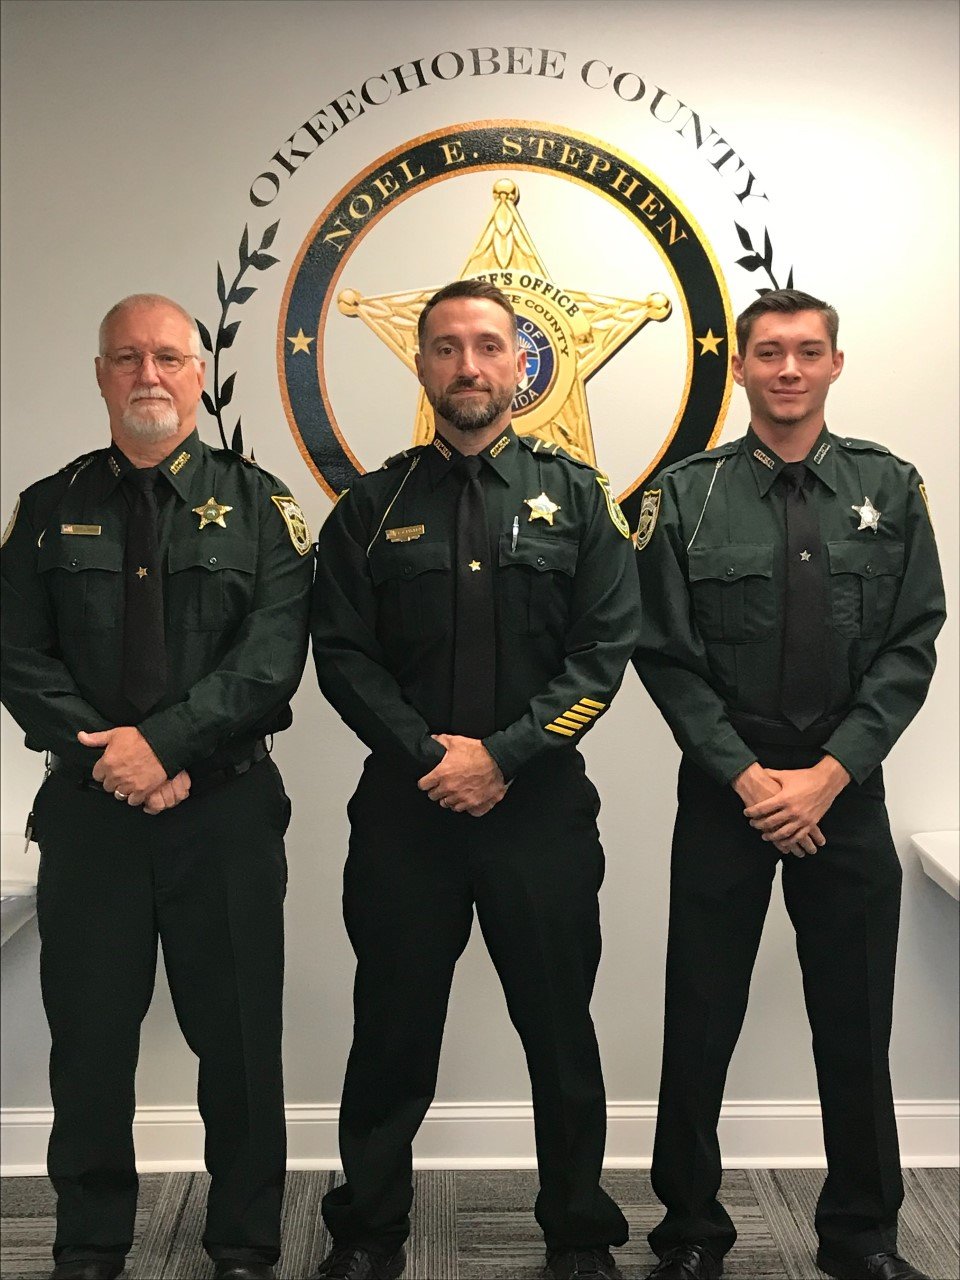 We are pleased to show Captain John Rhoden (Ret.), his son, Lt. John Rhoden Jr., and his son, Detention Deputy Recruit Logan Rhoden.

What a great upbringing all of these men have provided. Will there be a fourth?